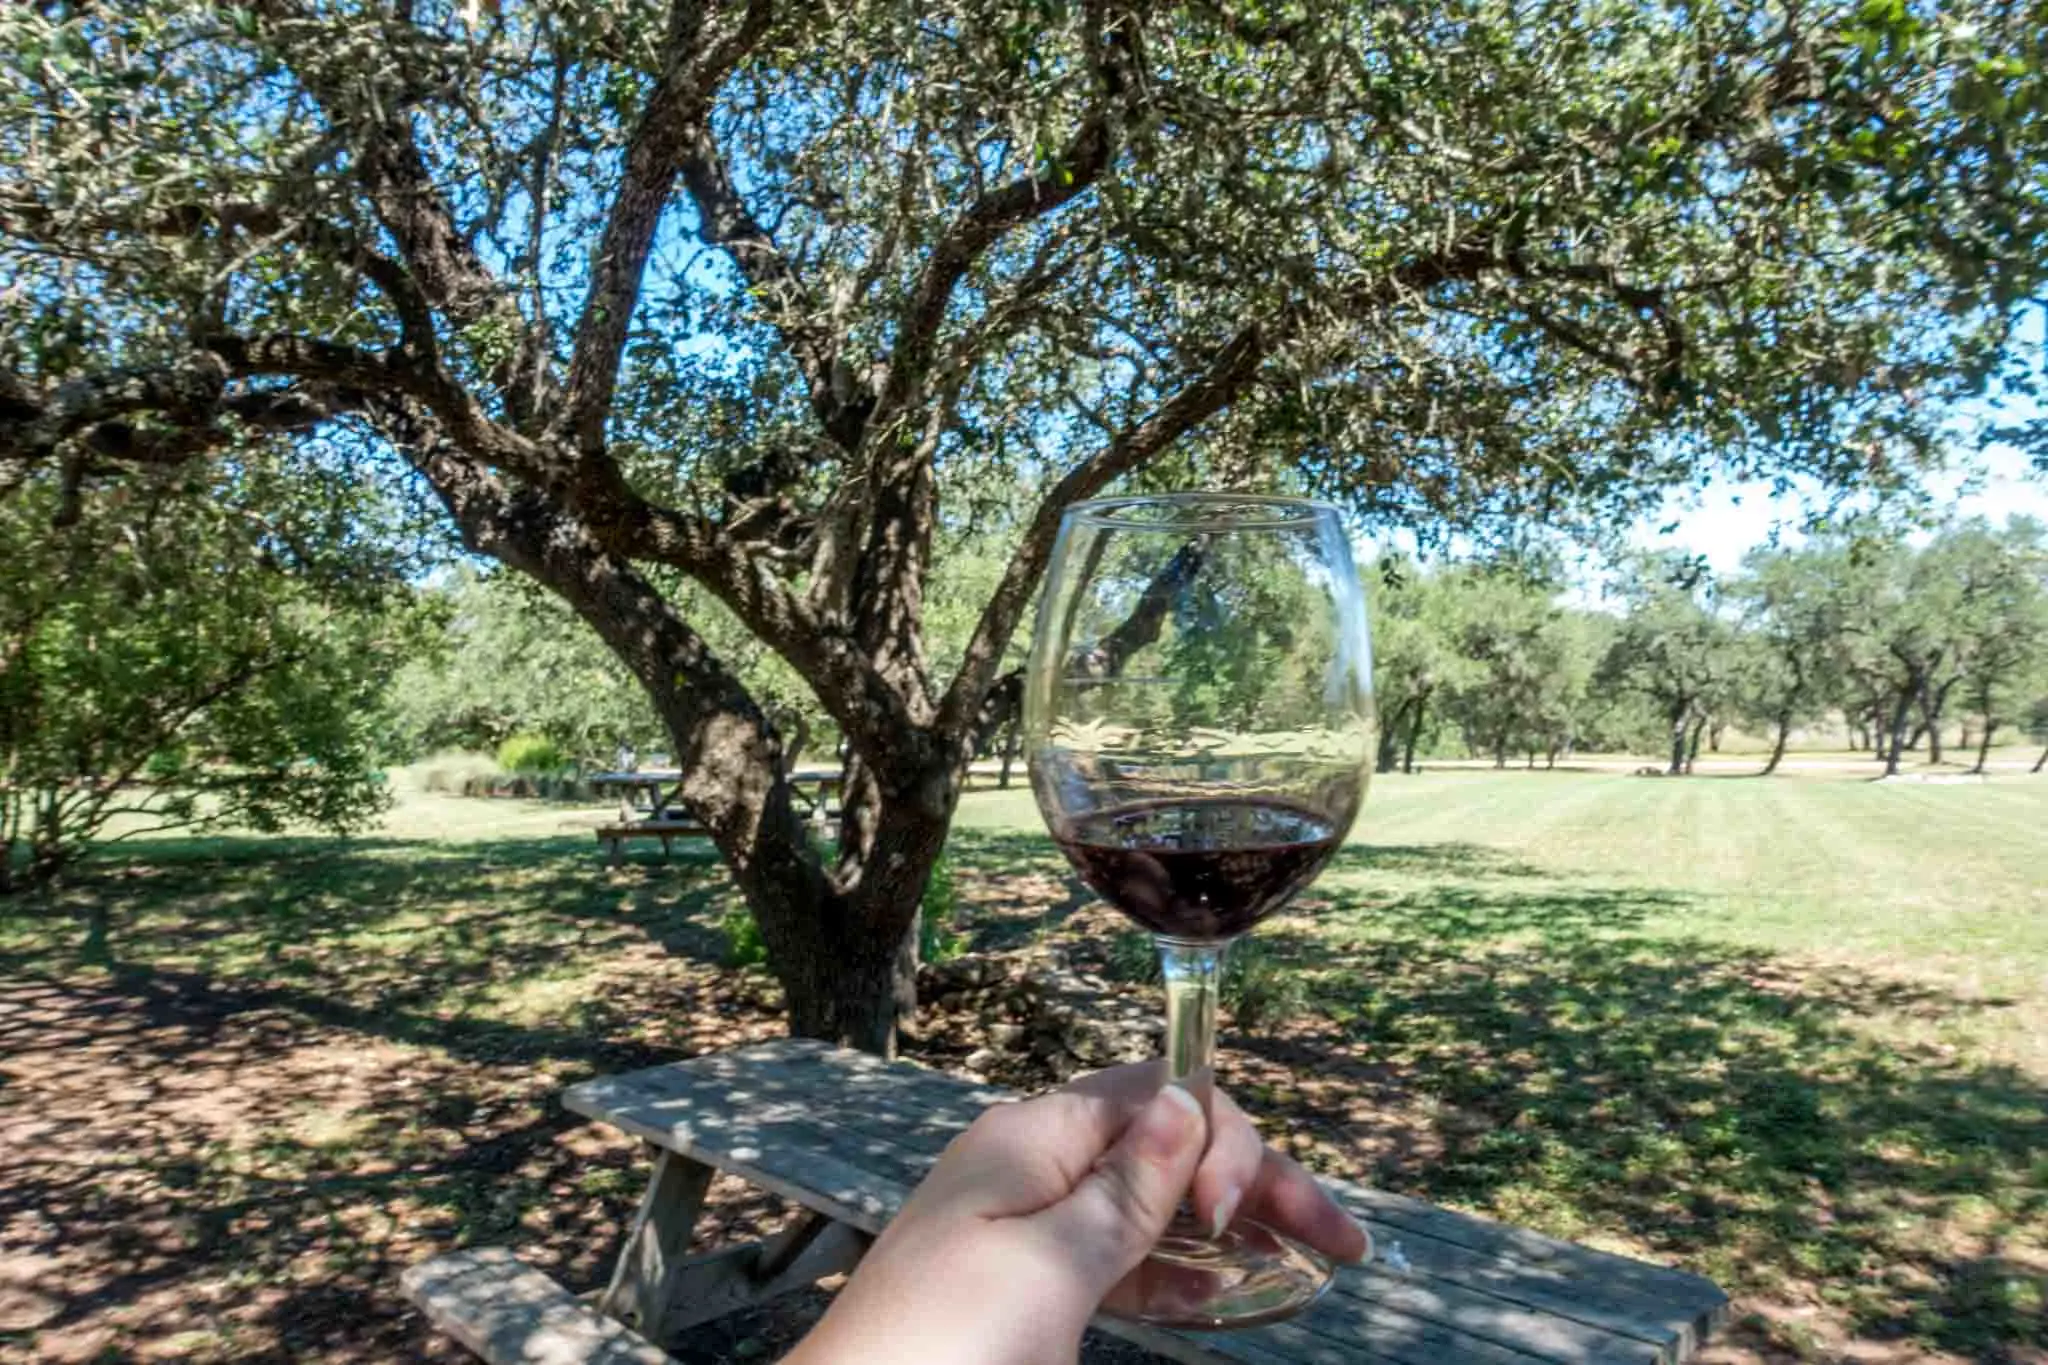 Hand holding a glass of red wine under a tree